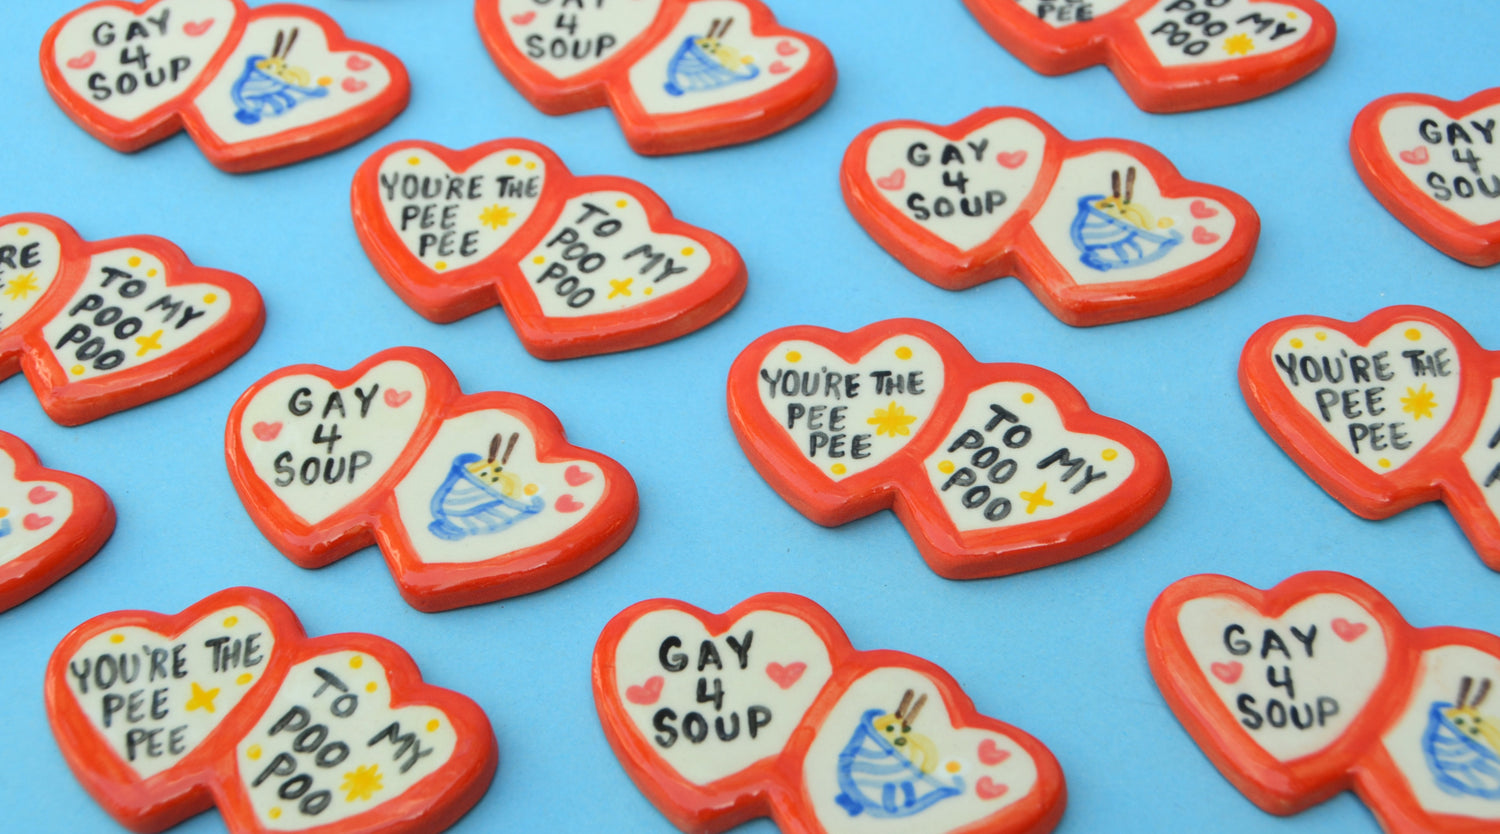 ceramic double red heart shaped magnets in repeating pattern. some say "gay for soup" the rest say "youre the peepee to my poopoo" 